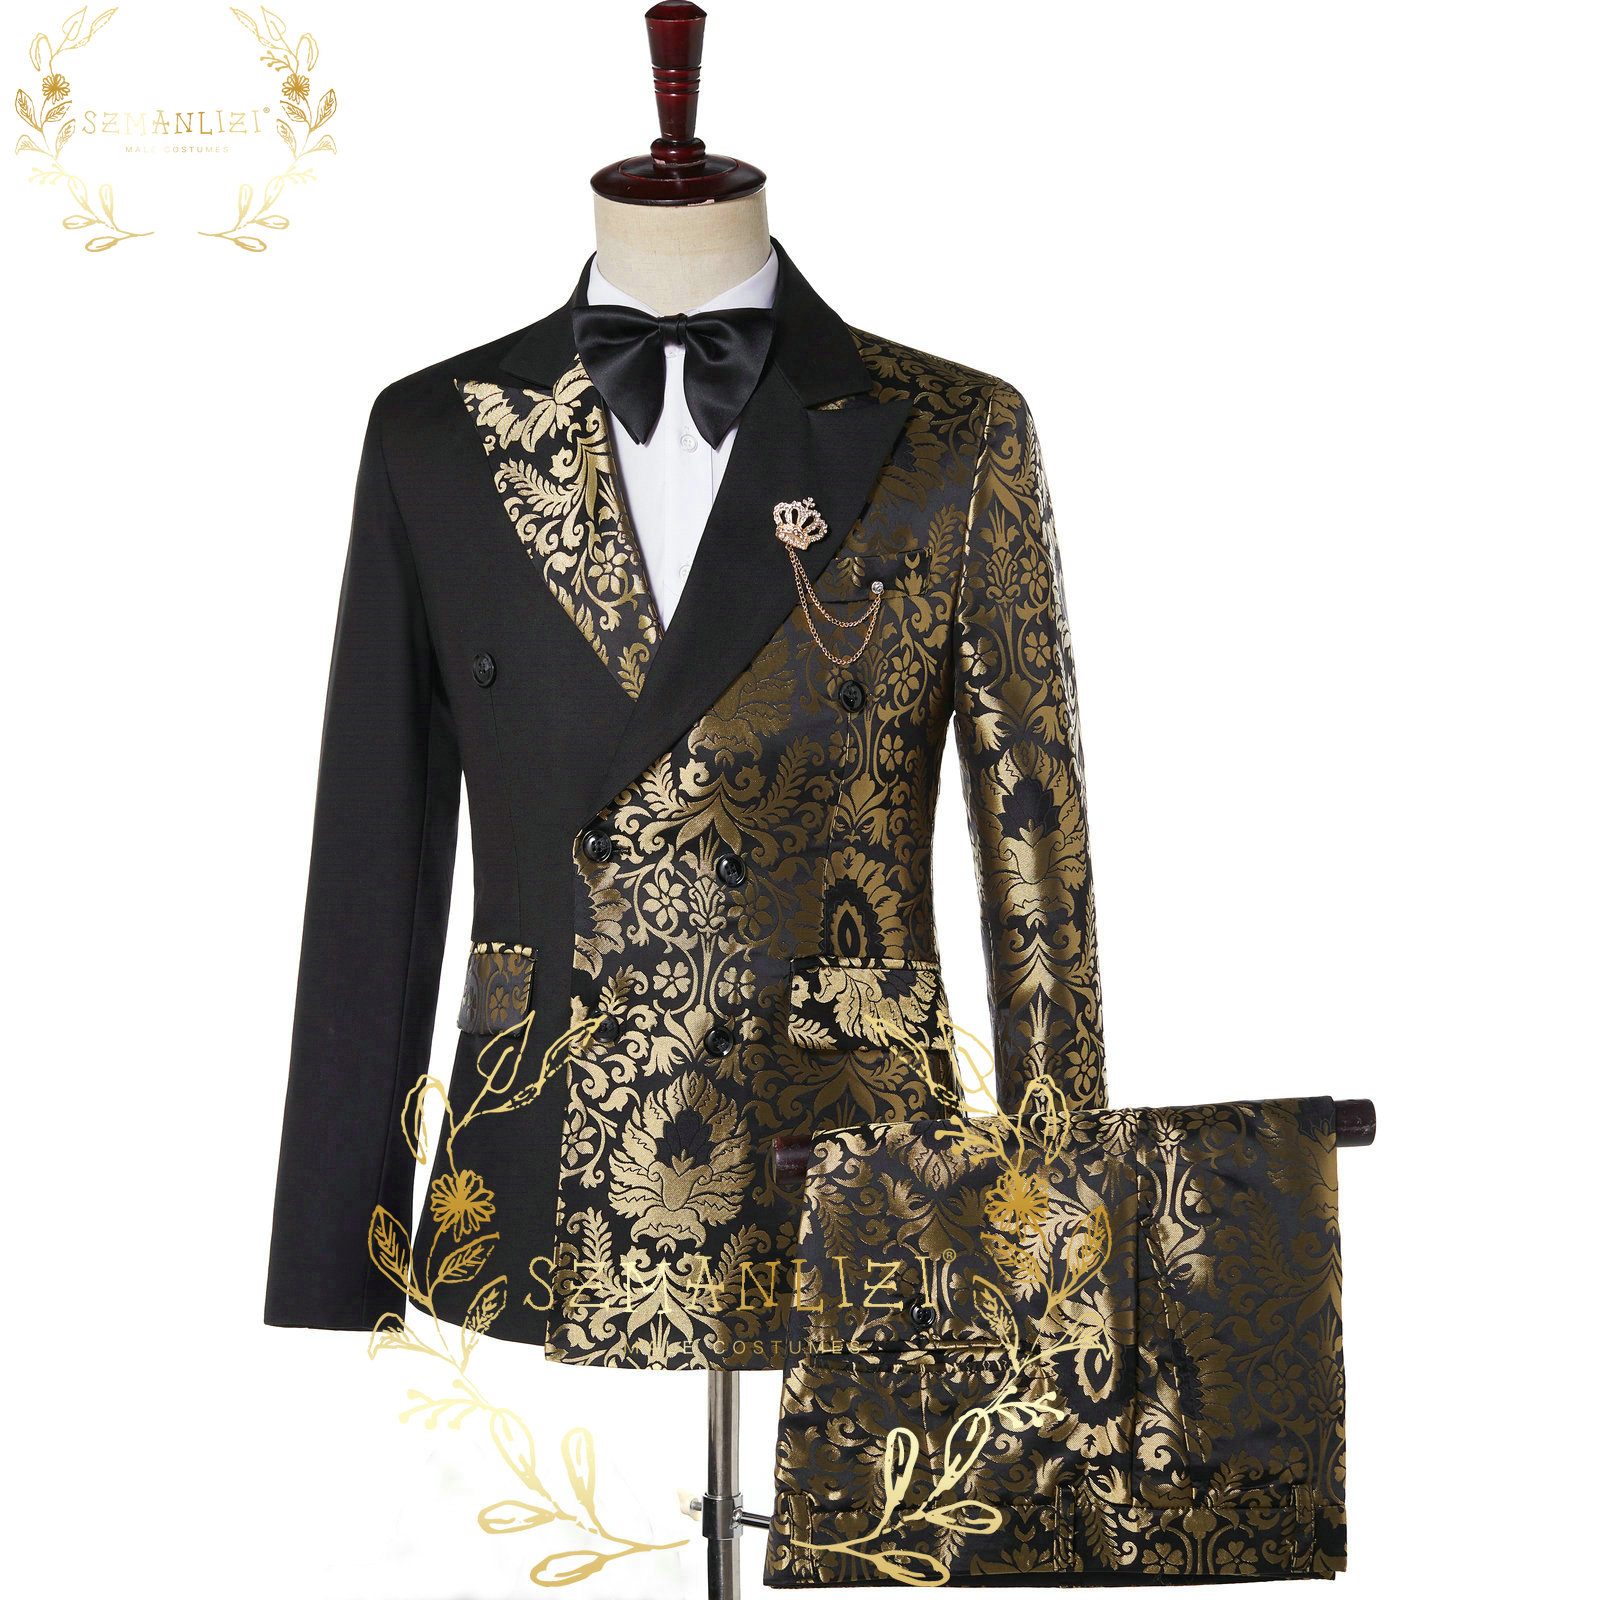 SZMANLIZI Double Breasted Black Gold Floral Jacquard Slim Fit Mens Suits Wedding Groom Tuxedos Party Jacket Pant Terno Masculino